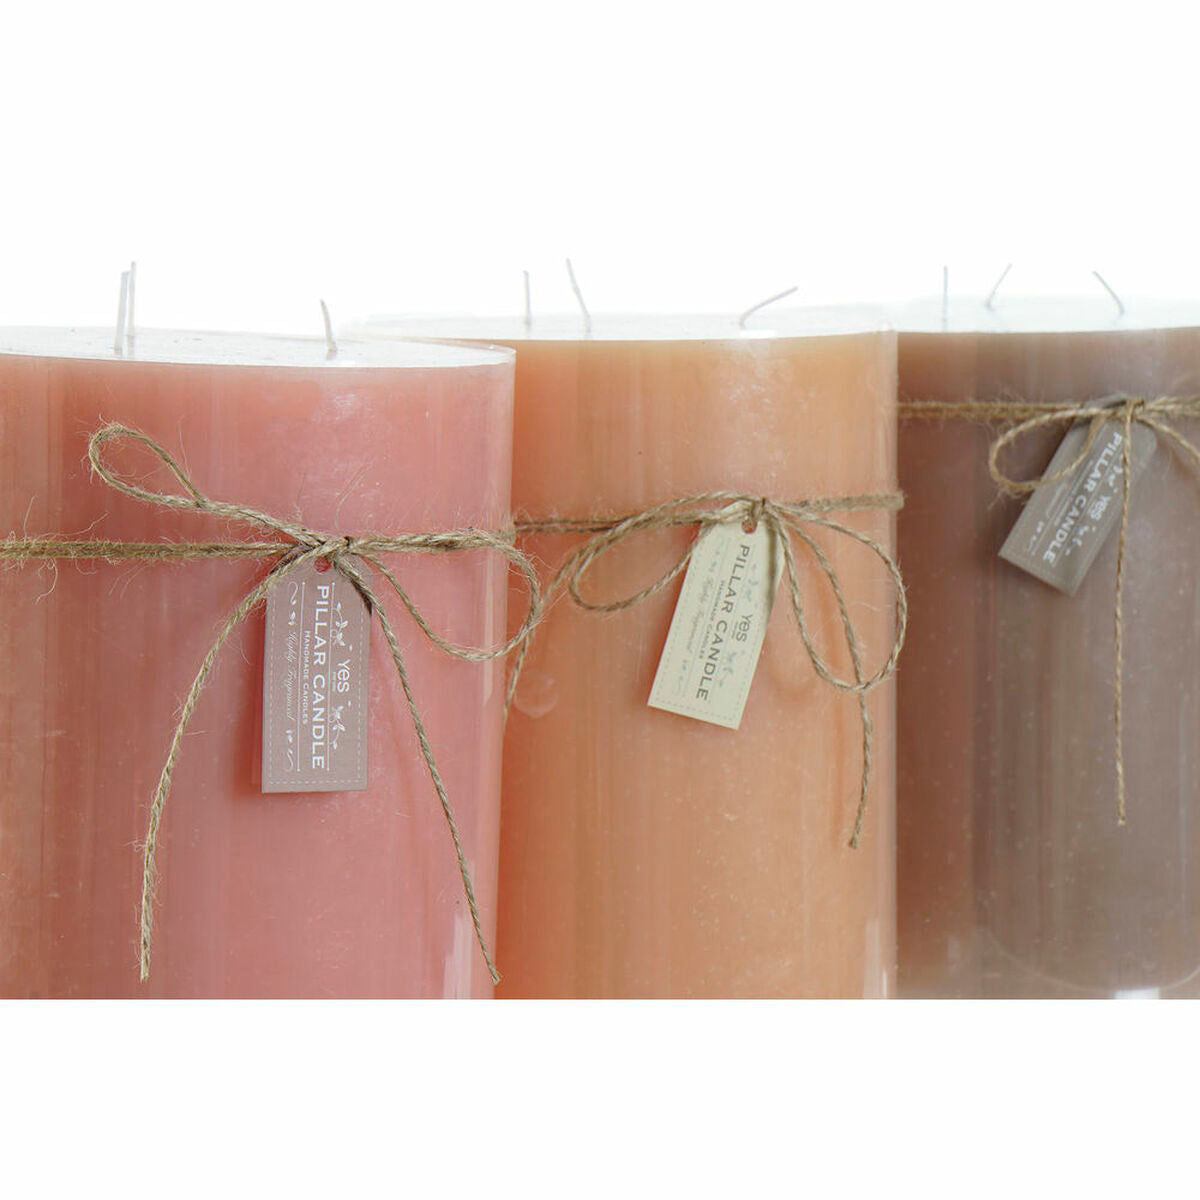 Scented Candle DKD Home Decor (3) (3 Pieces)